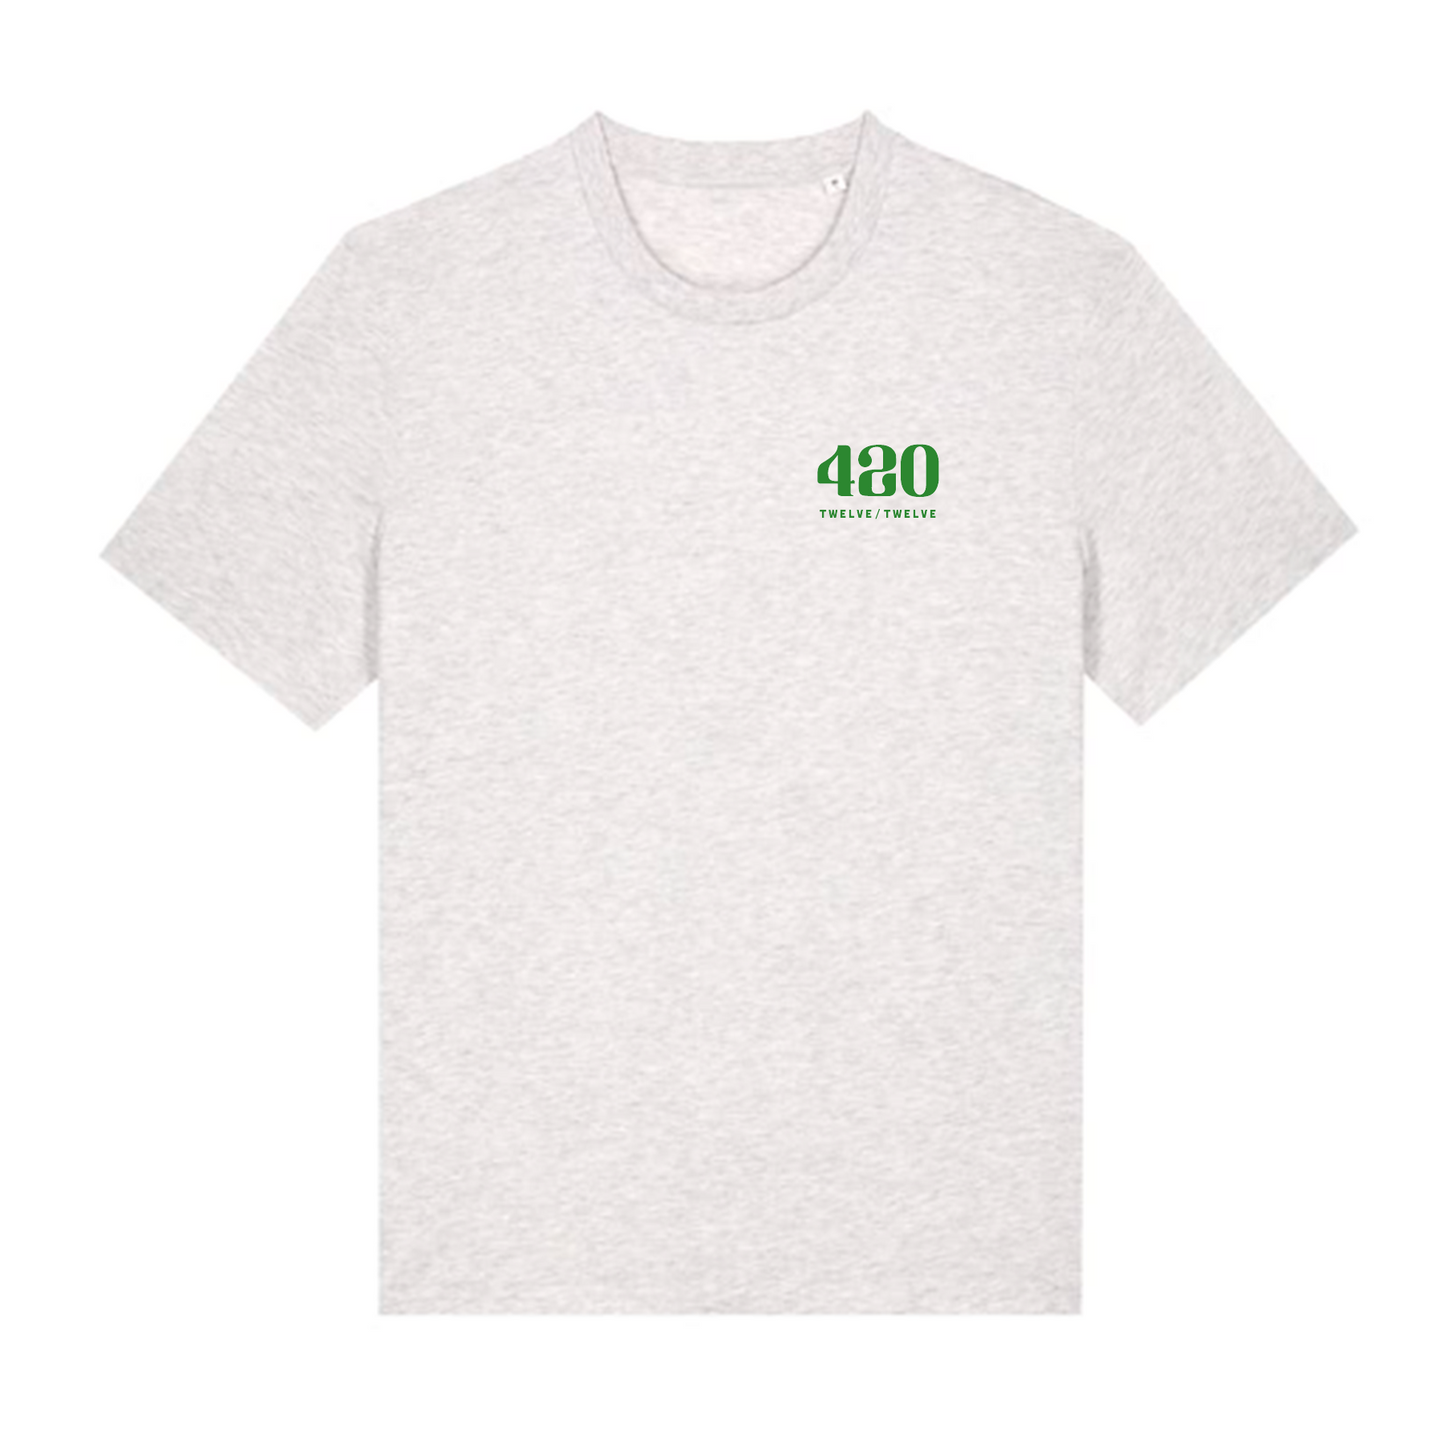 420 Limited Edition Tee